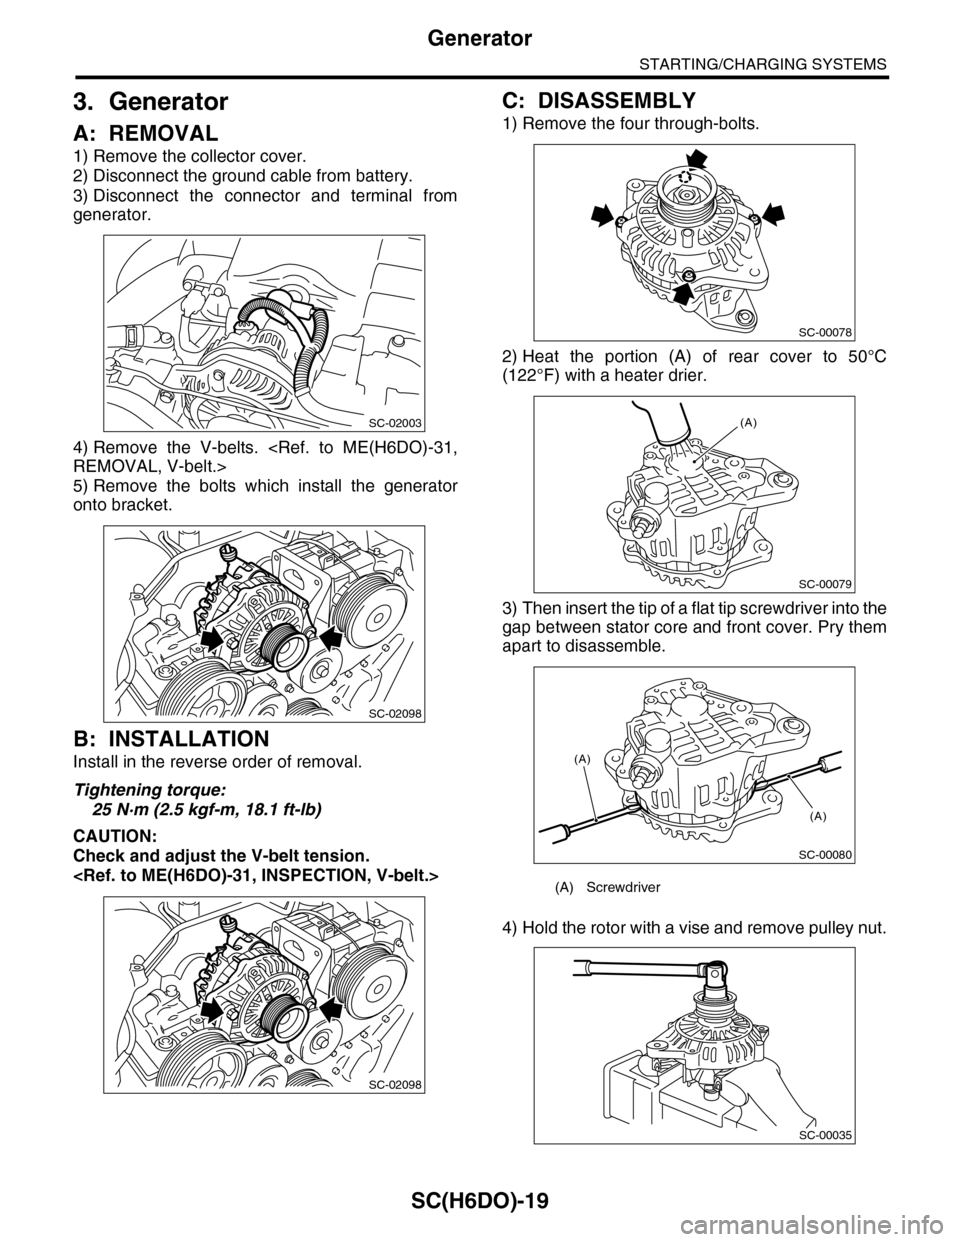 SUBARU TRIBECA 2009 1.G Service Owners Manual SC(H6DO)-19
Generator
STARTING/CHARGING SYSTEMS
3. Generator
A: REMOVAL
1) Remove the collector cover.
2) Disconnect the ground cable from battery.
3) Disconnect  the  connector  and  terminal  from
g